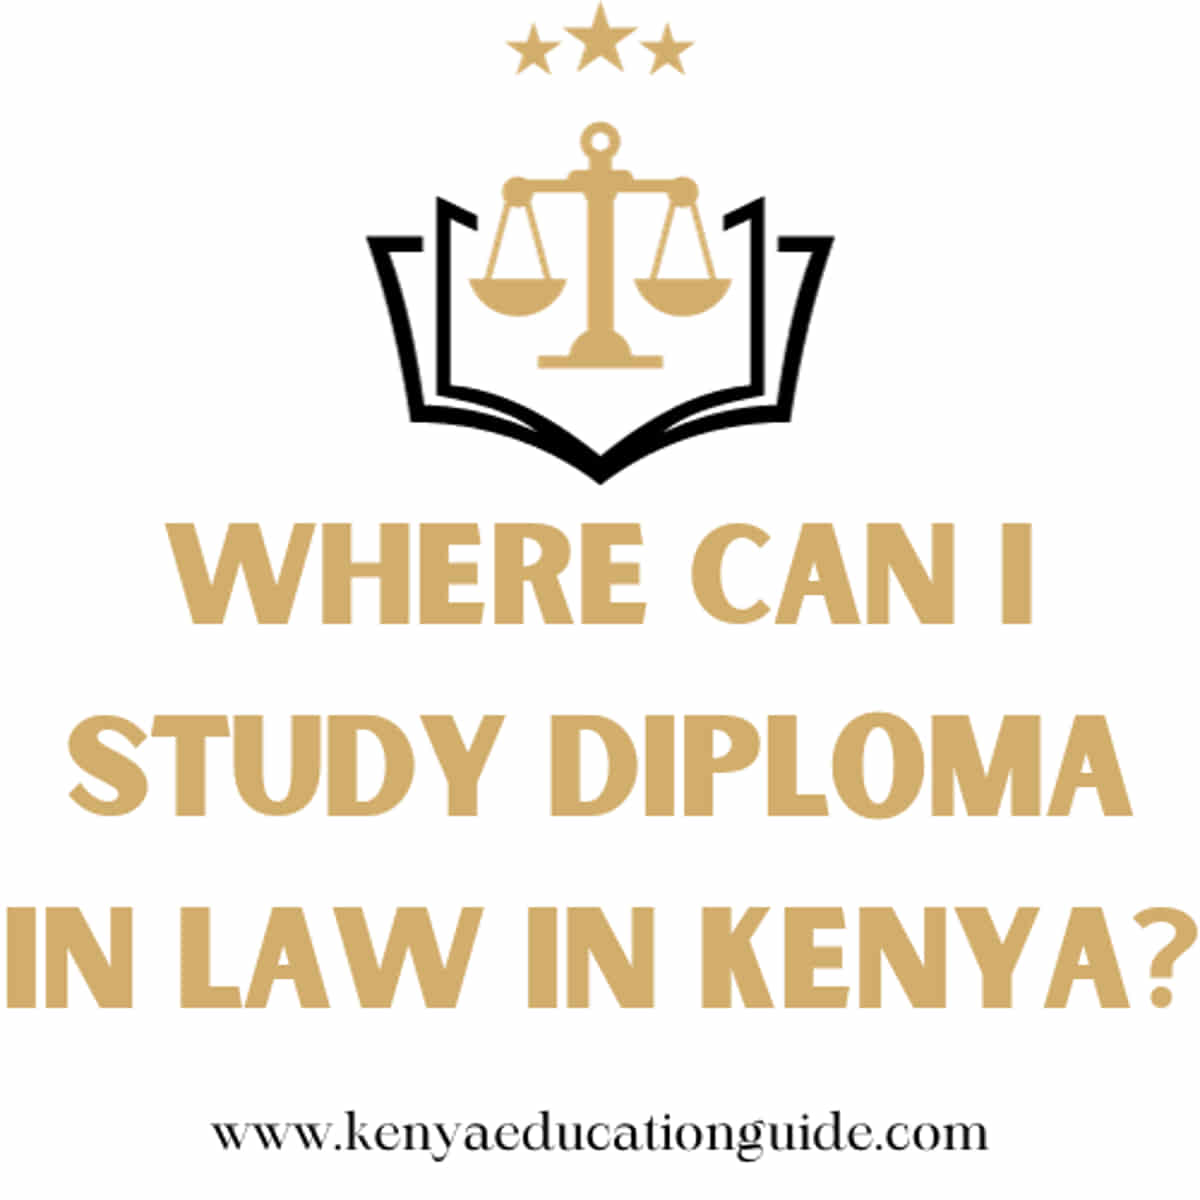 Where can I study diploma in law in Kenya